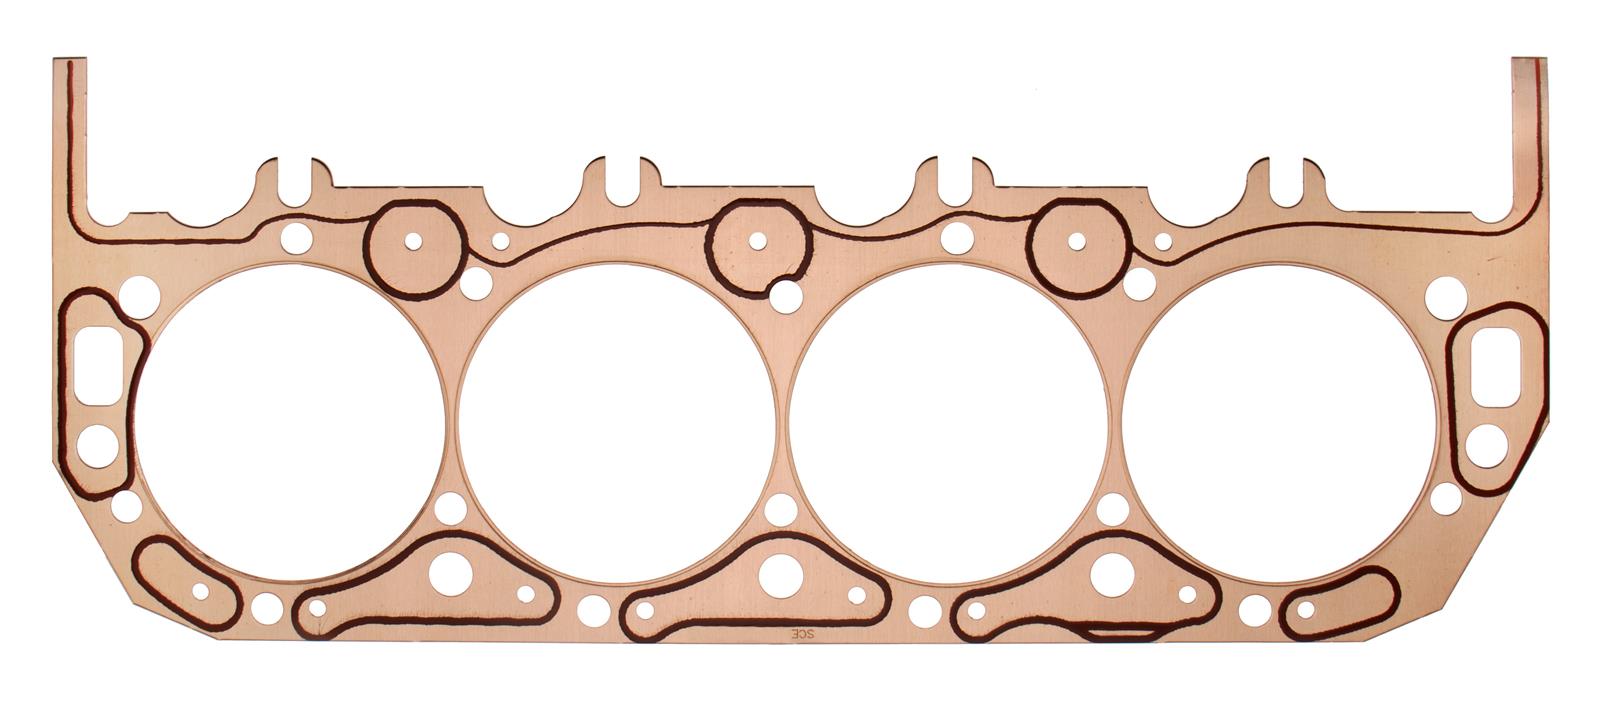 SCE Gaskets Cylinder Head Gasket, Pro Copper, 4.630 in Bore, 0.062 in Compression Thickness, Copper, Big Block Chevy, Each - 1